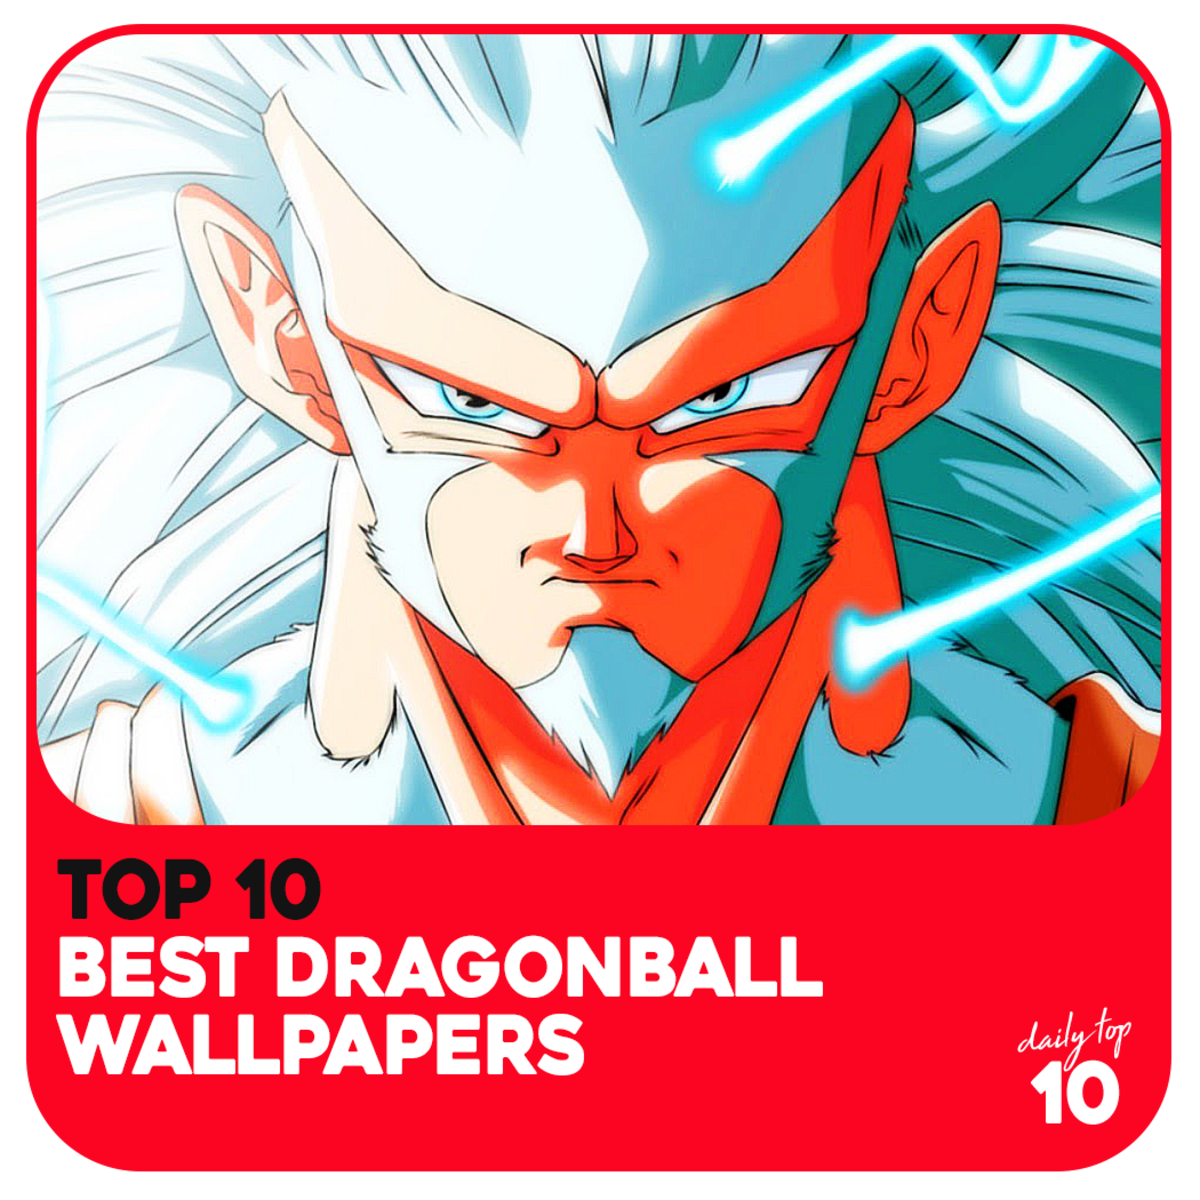 Top 10 Best Dragonball Wallpapers Hd (Updated With Dragonball